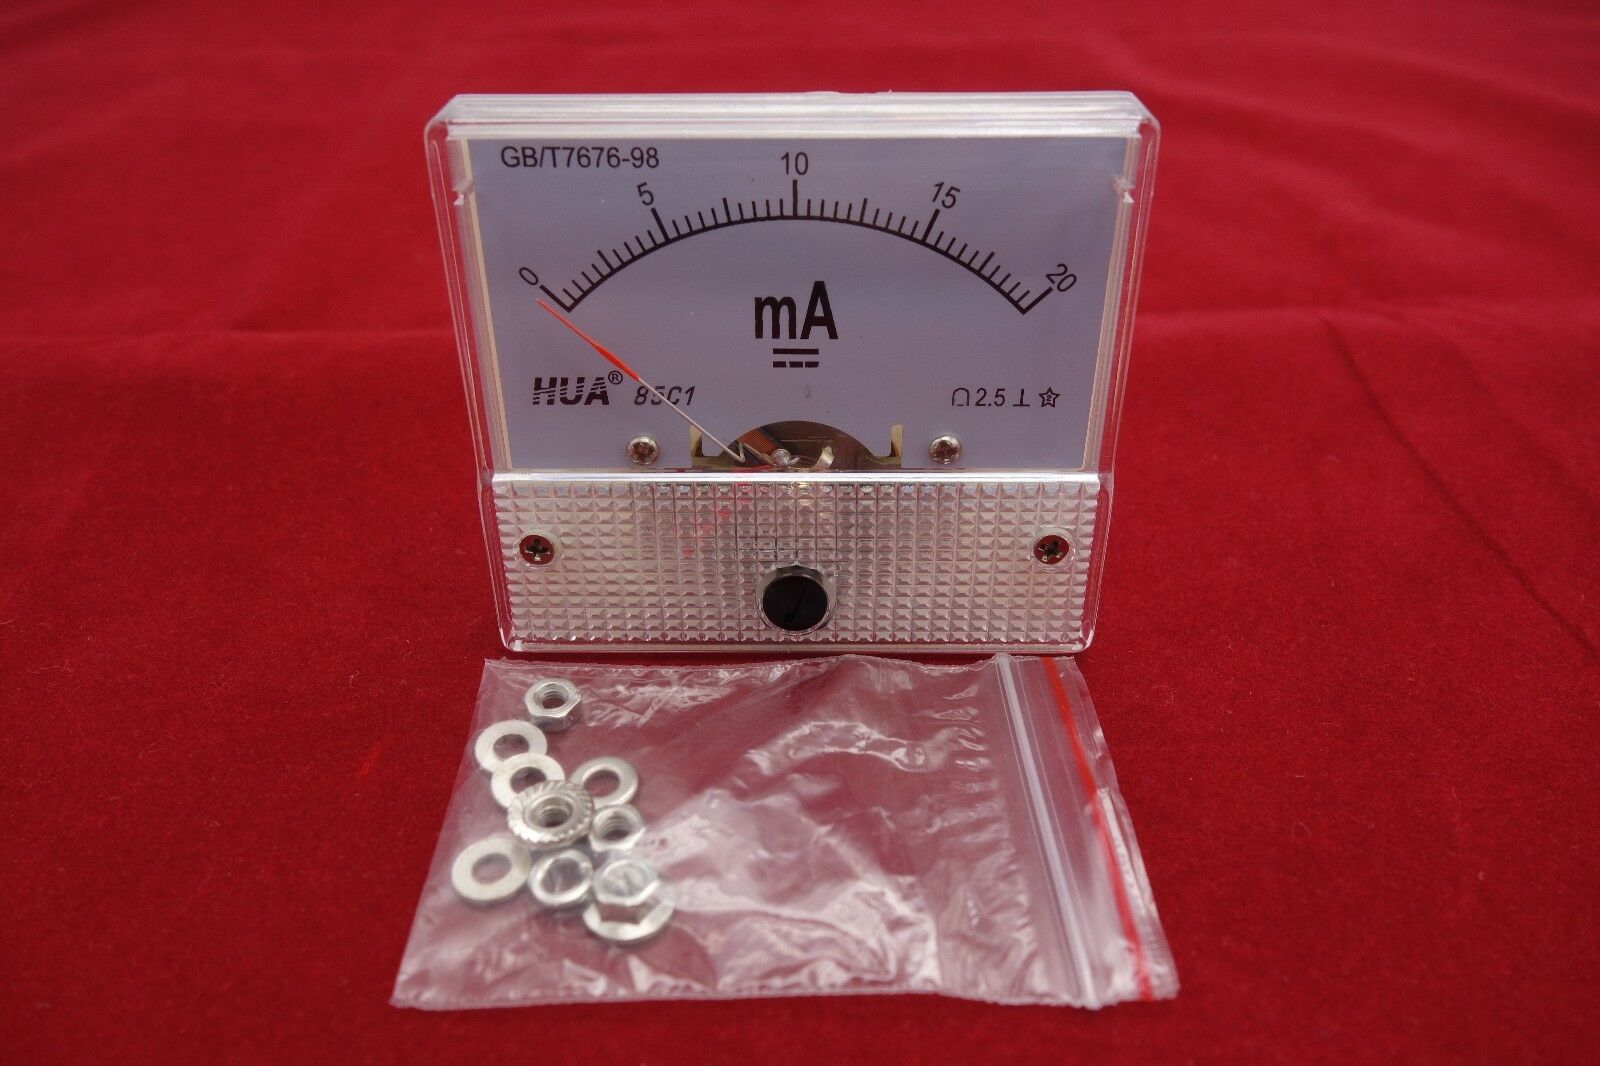 DC 20mA Analog Ammeter Panel Current Meter 85C1 0-20mA DC directly Connect